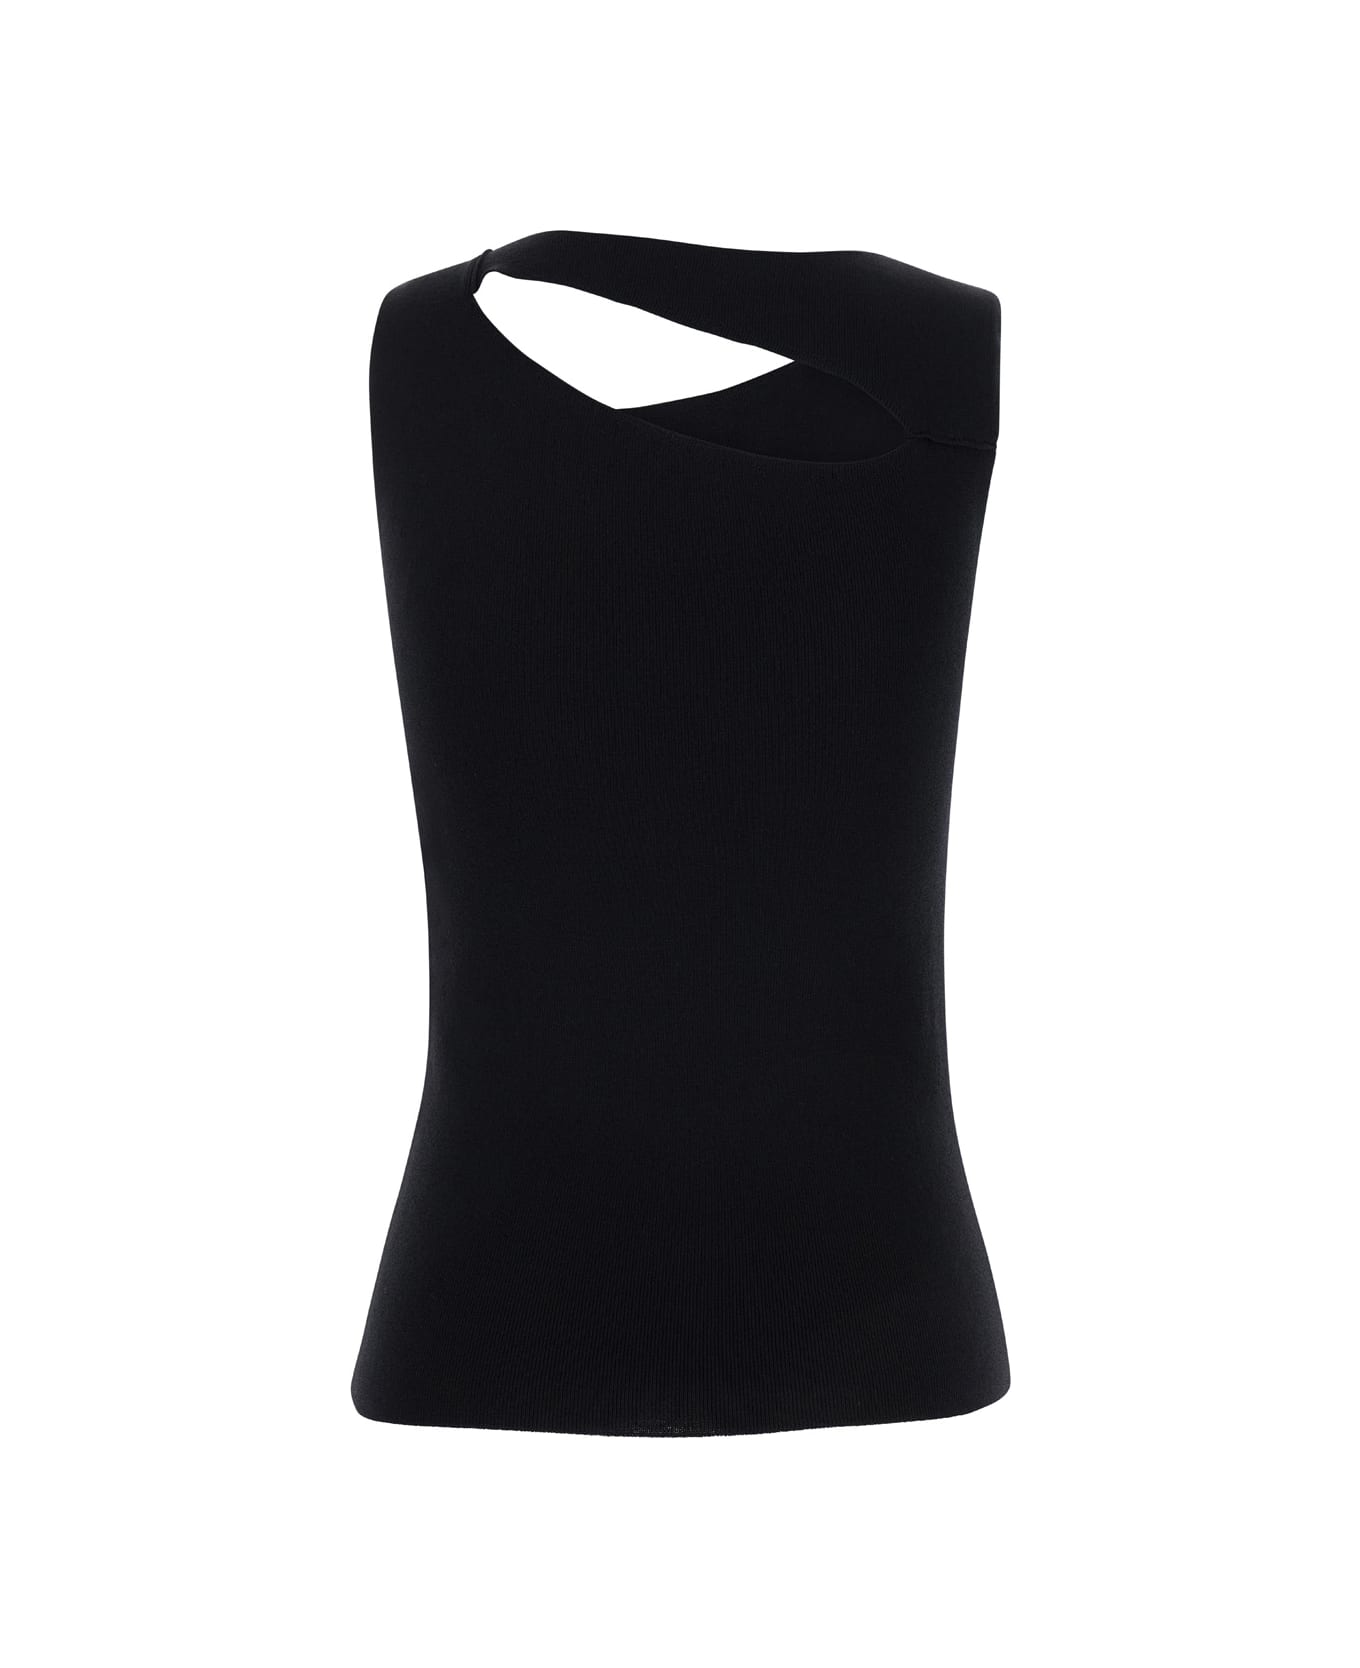 SEMICOUTURE Black Sleeveless Top With Cut-out At The Front And Back In Viscose Blend Woman - Black